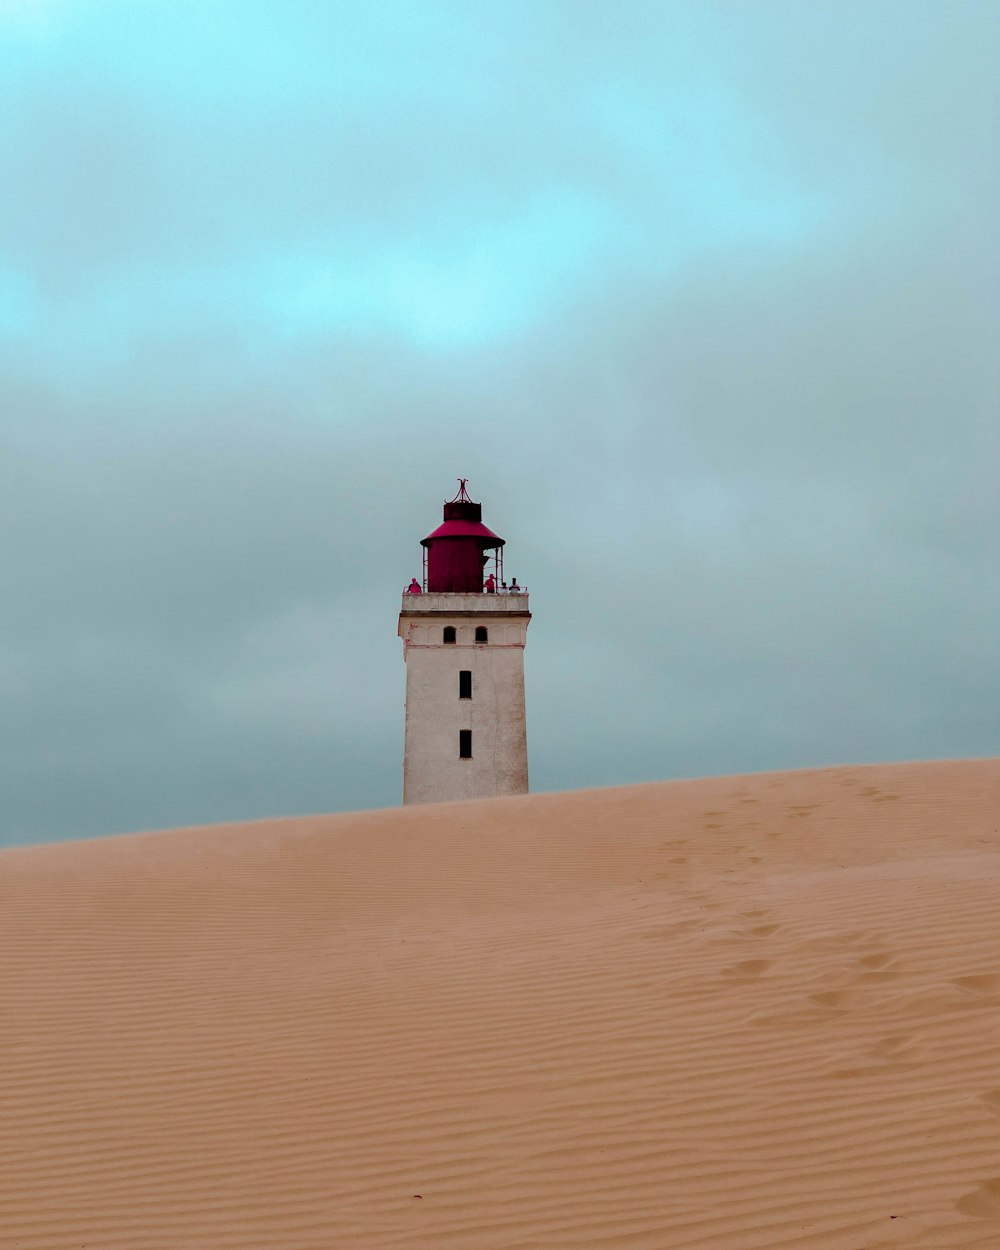 a light house sitting on top of a sandy hill